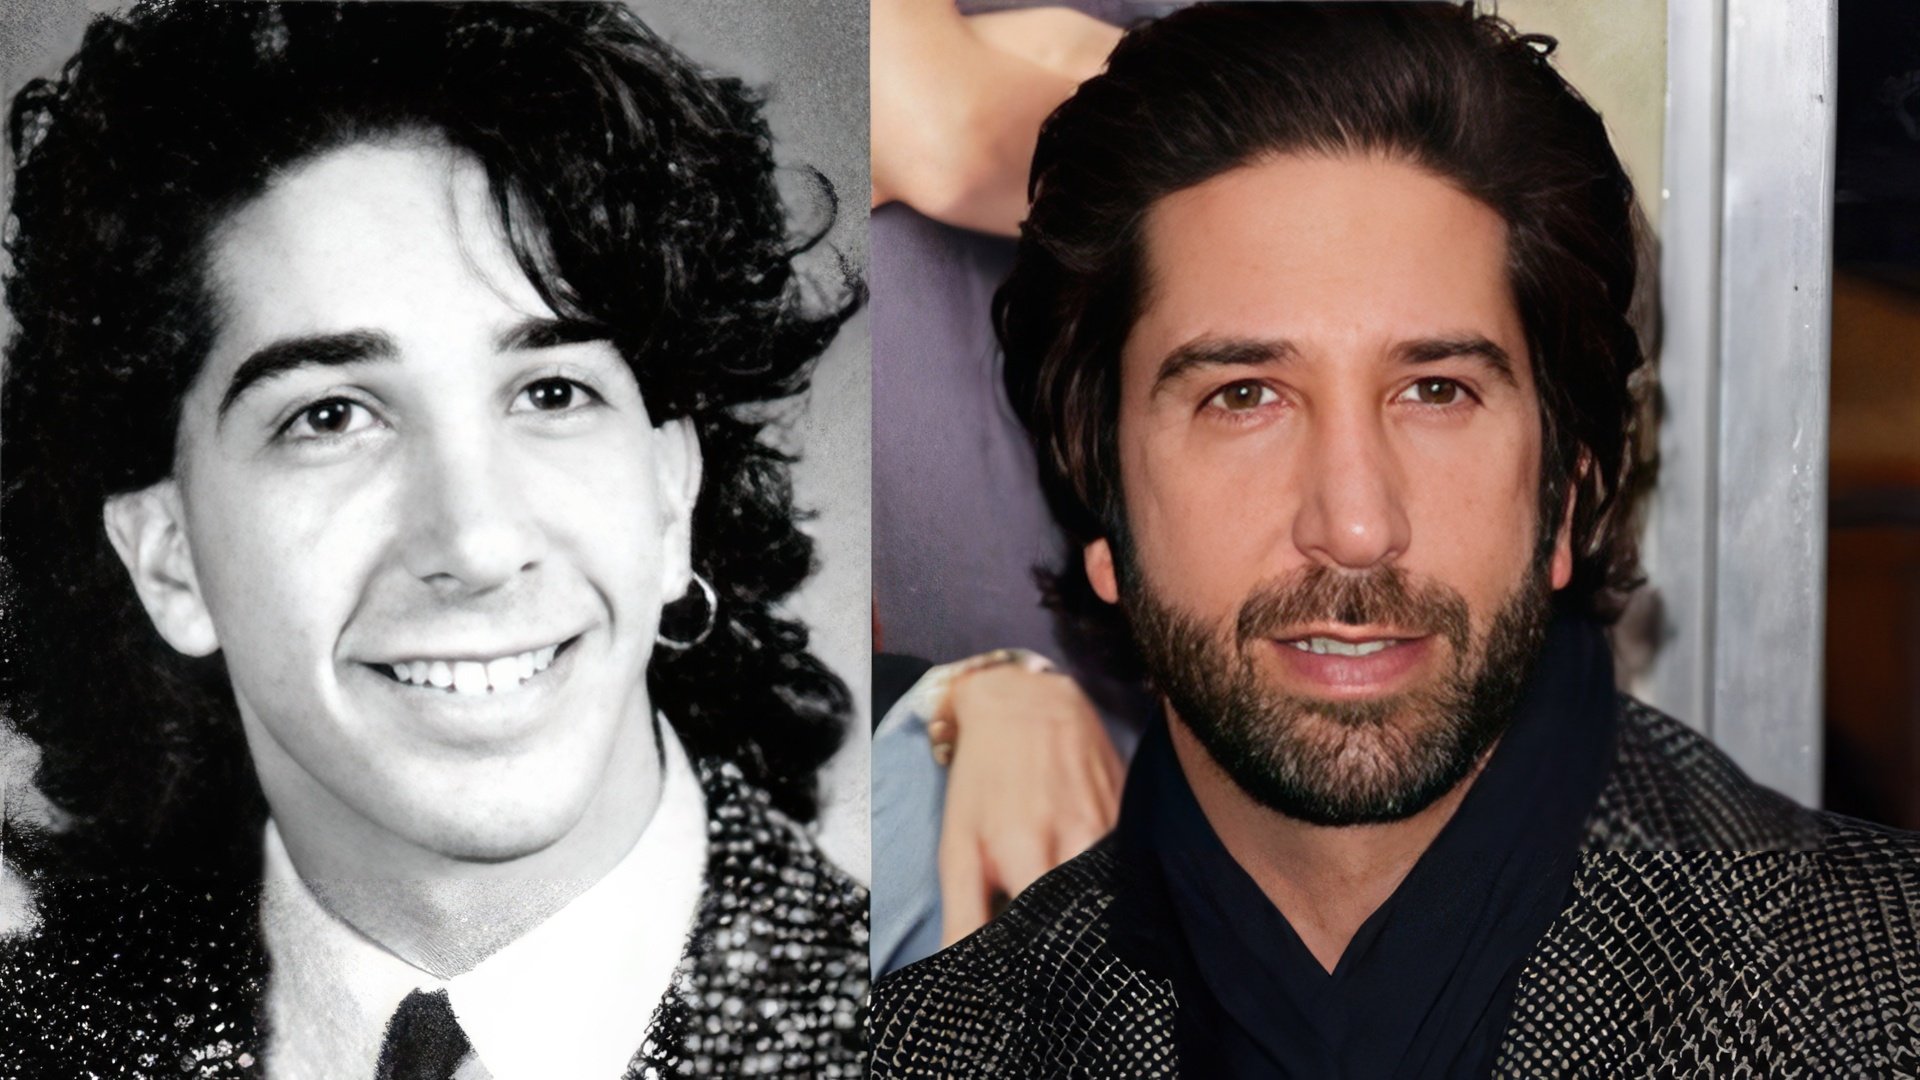 David Schwimmer in his youth and now